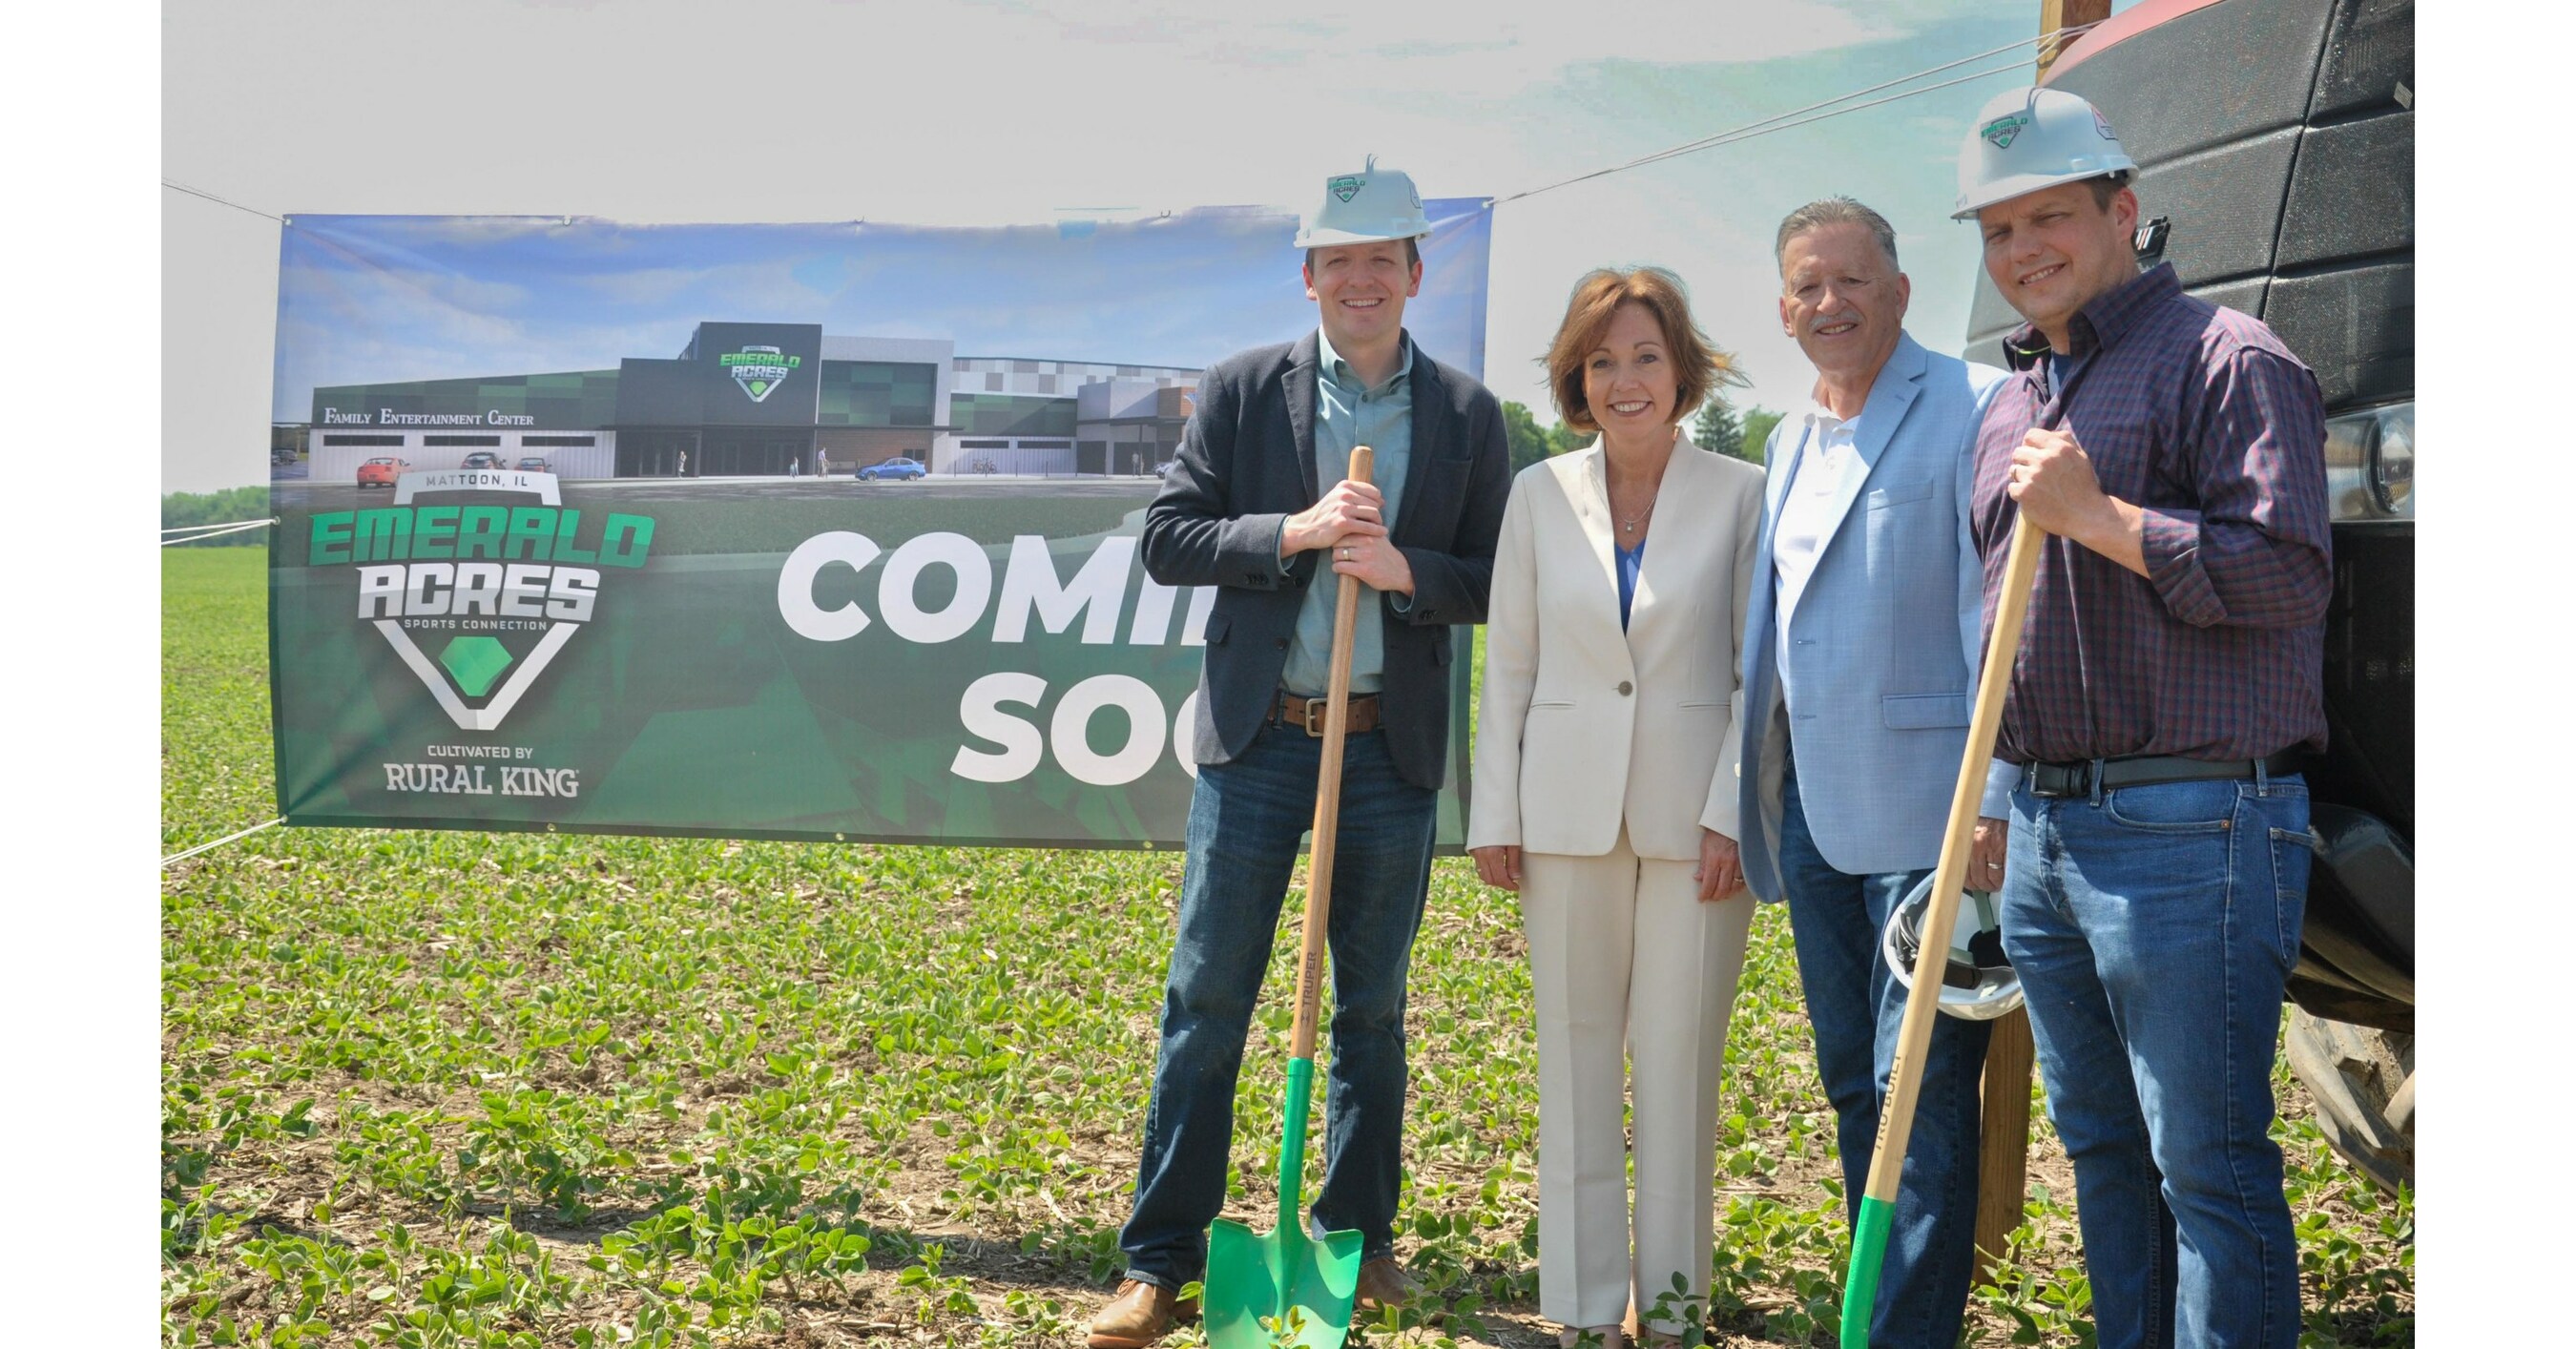 Emerald Acres Sports Connection Celebrates Successful Groundbreaking Event